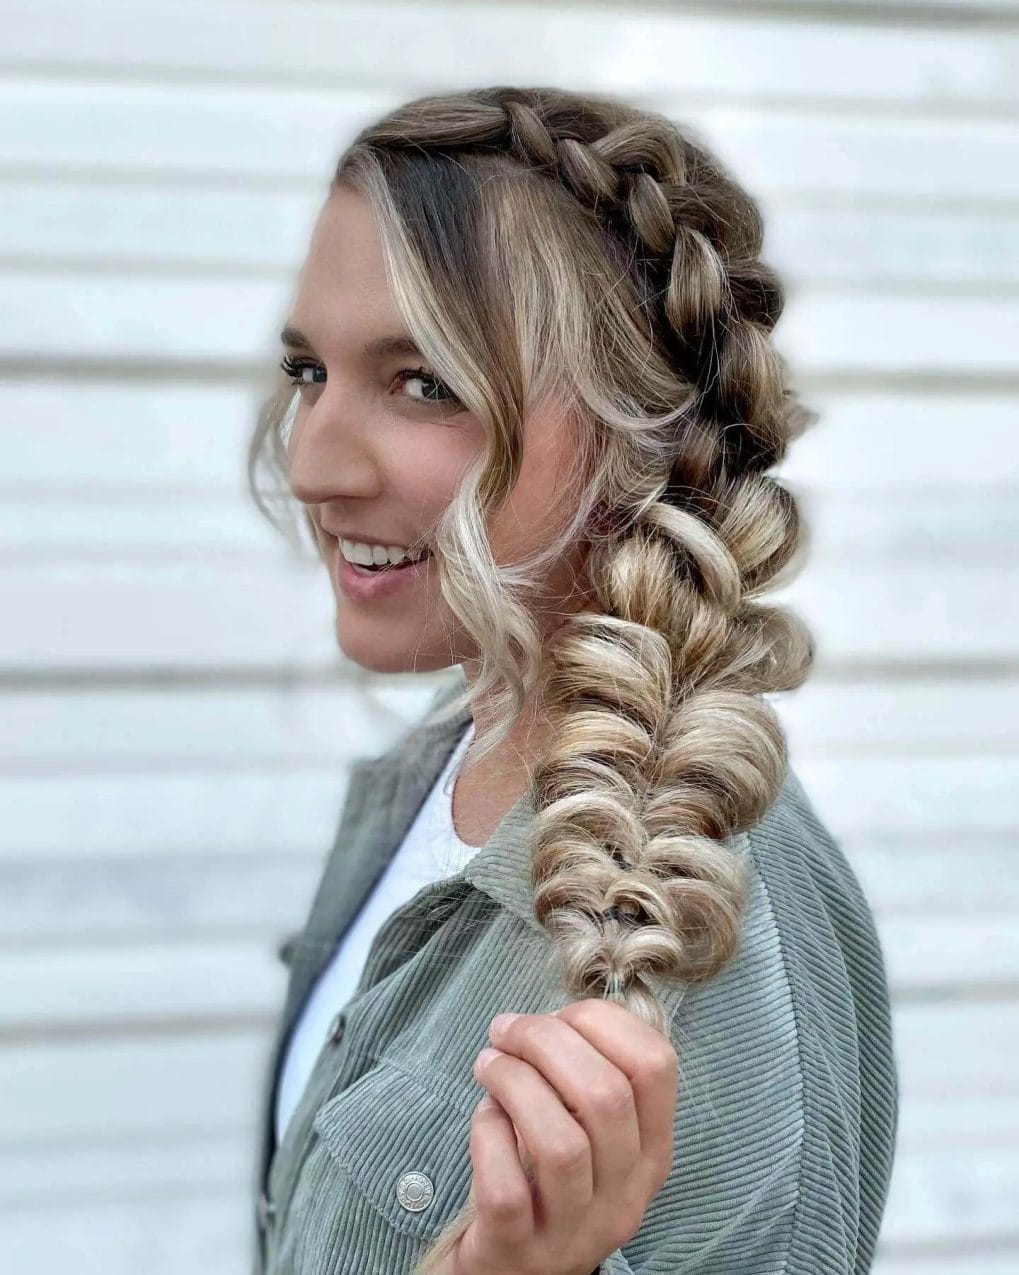 Side Dutch braid transitions into a blonde-highlighted bubble ponytail.